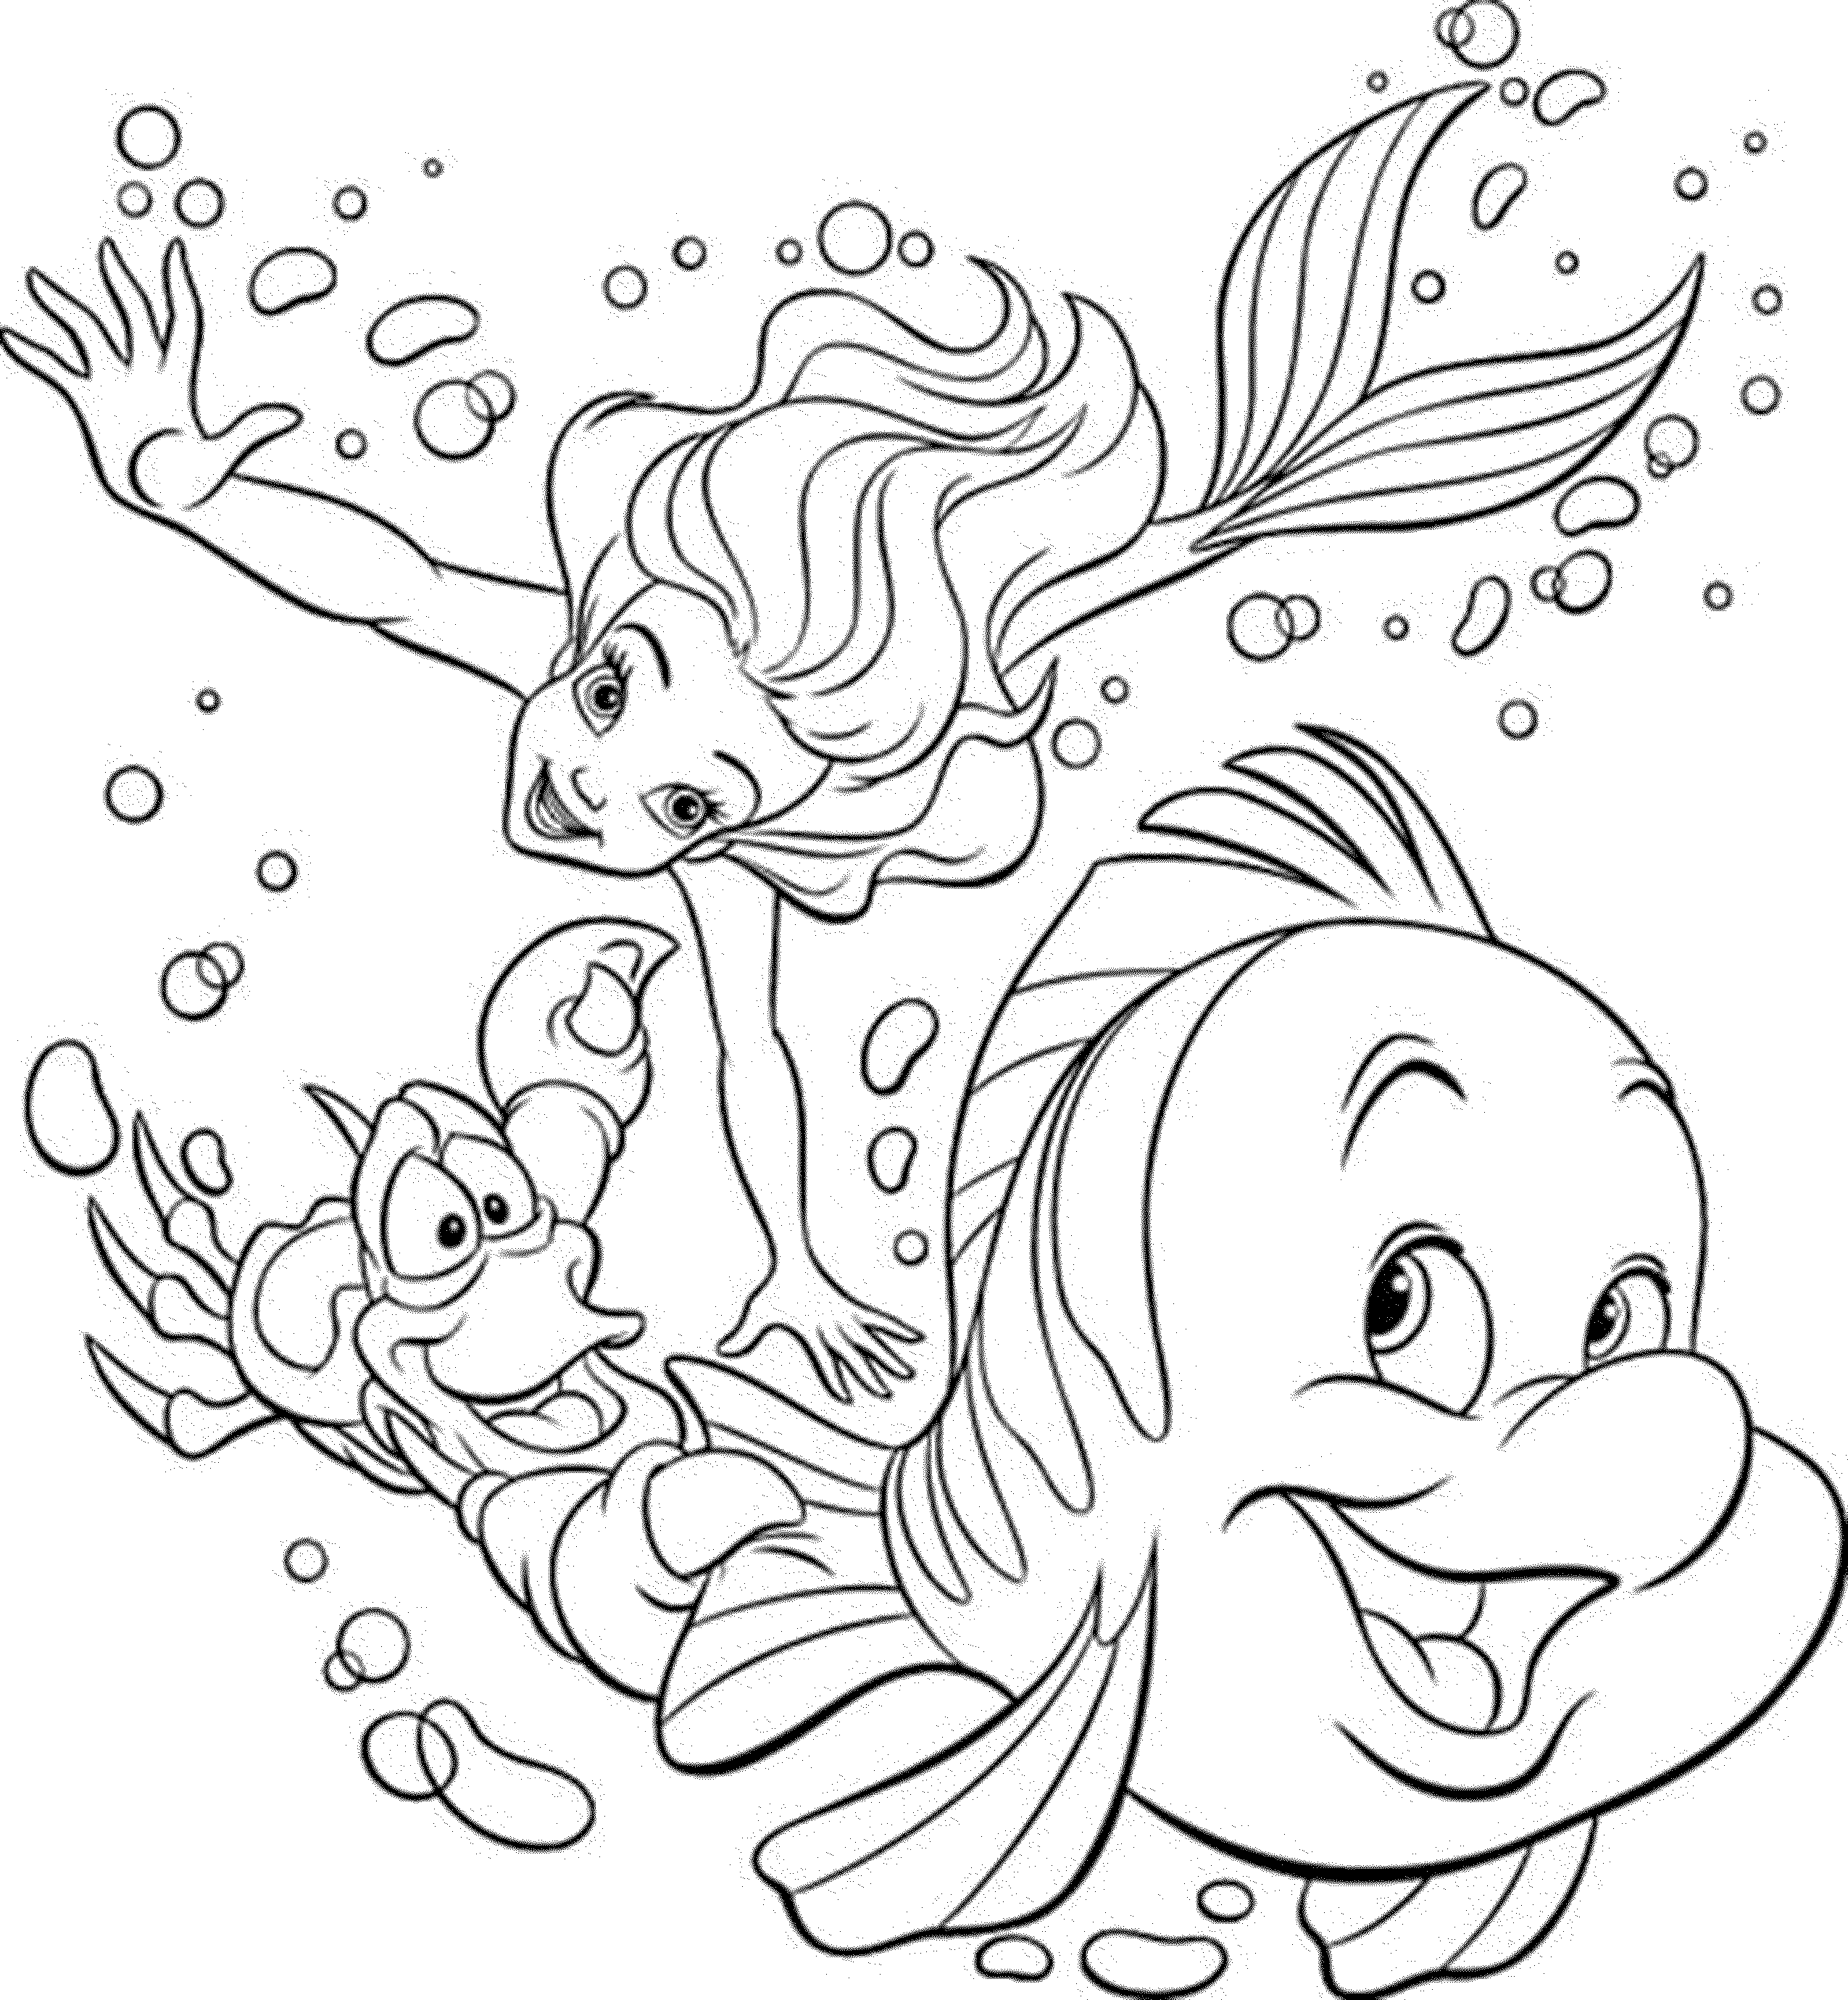 Funny coloring pages for adults BestAppsForKids